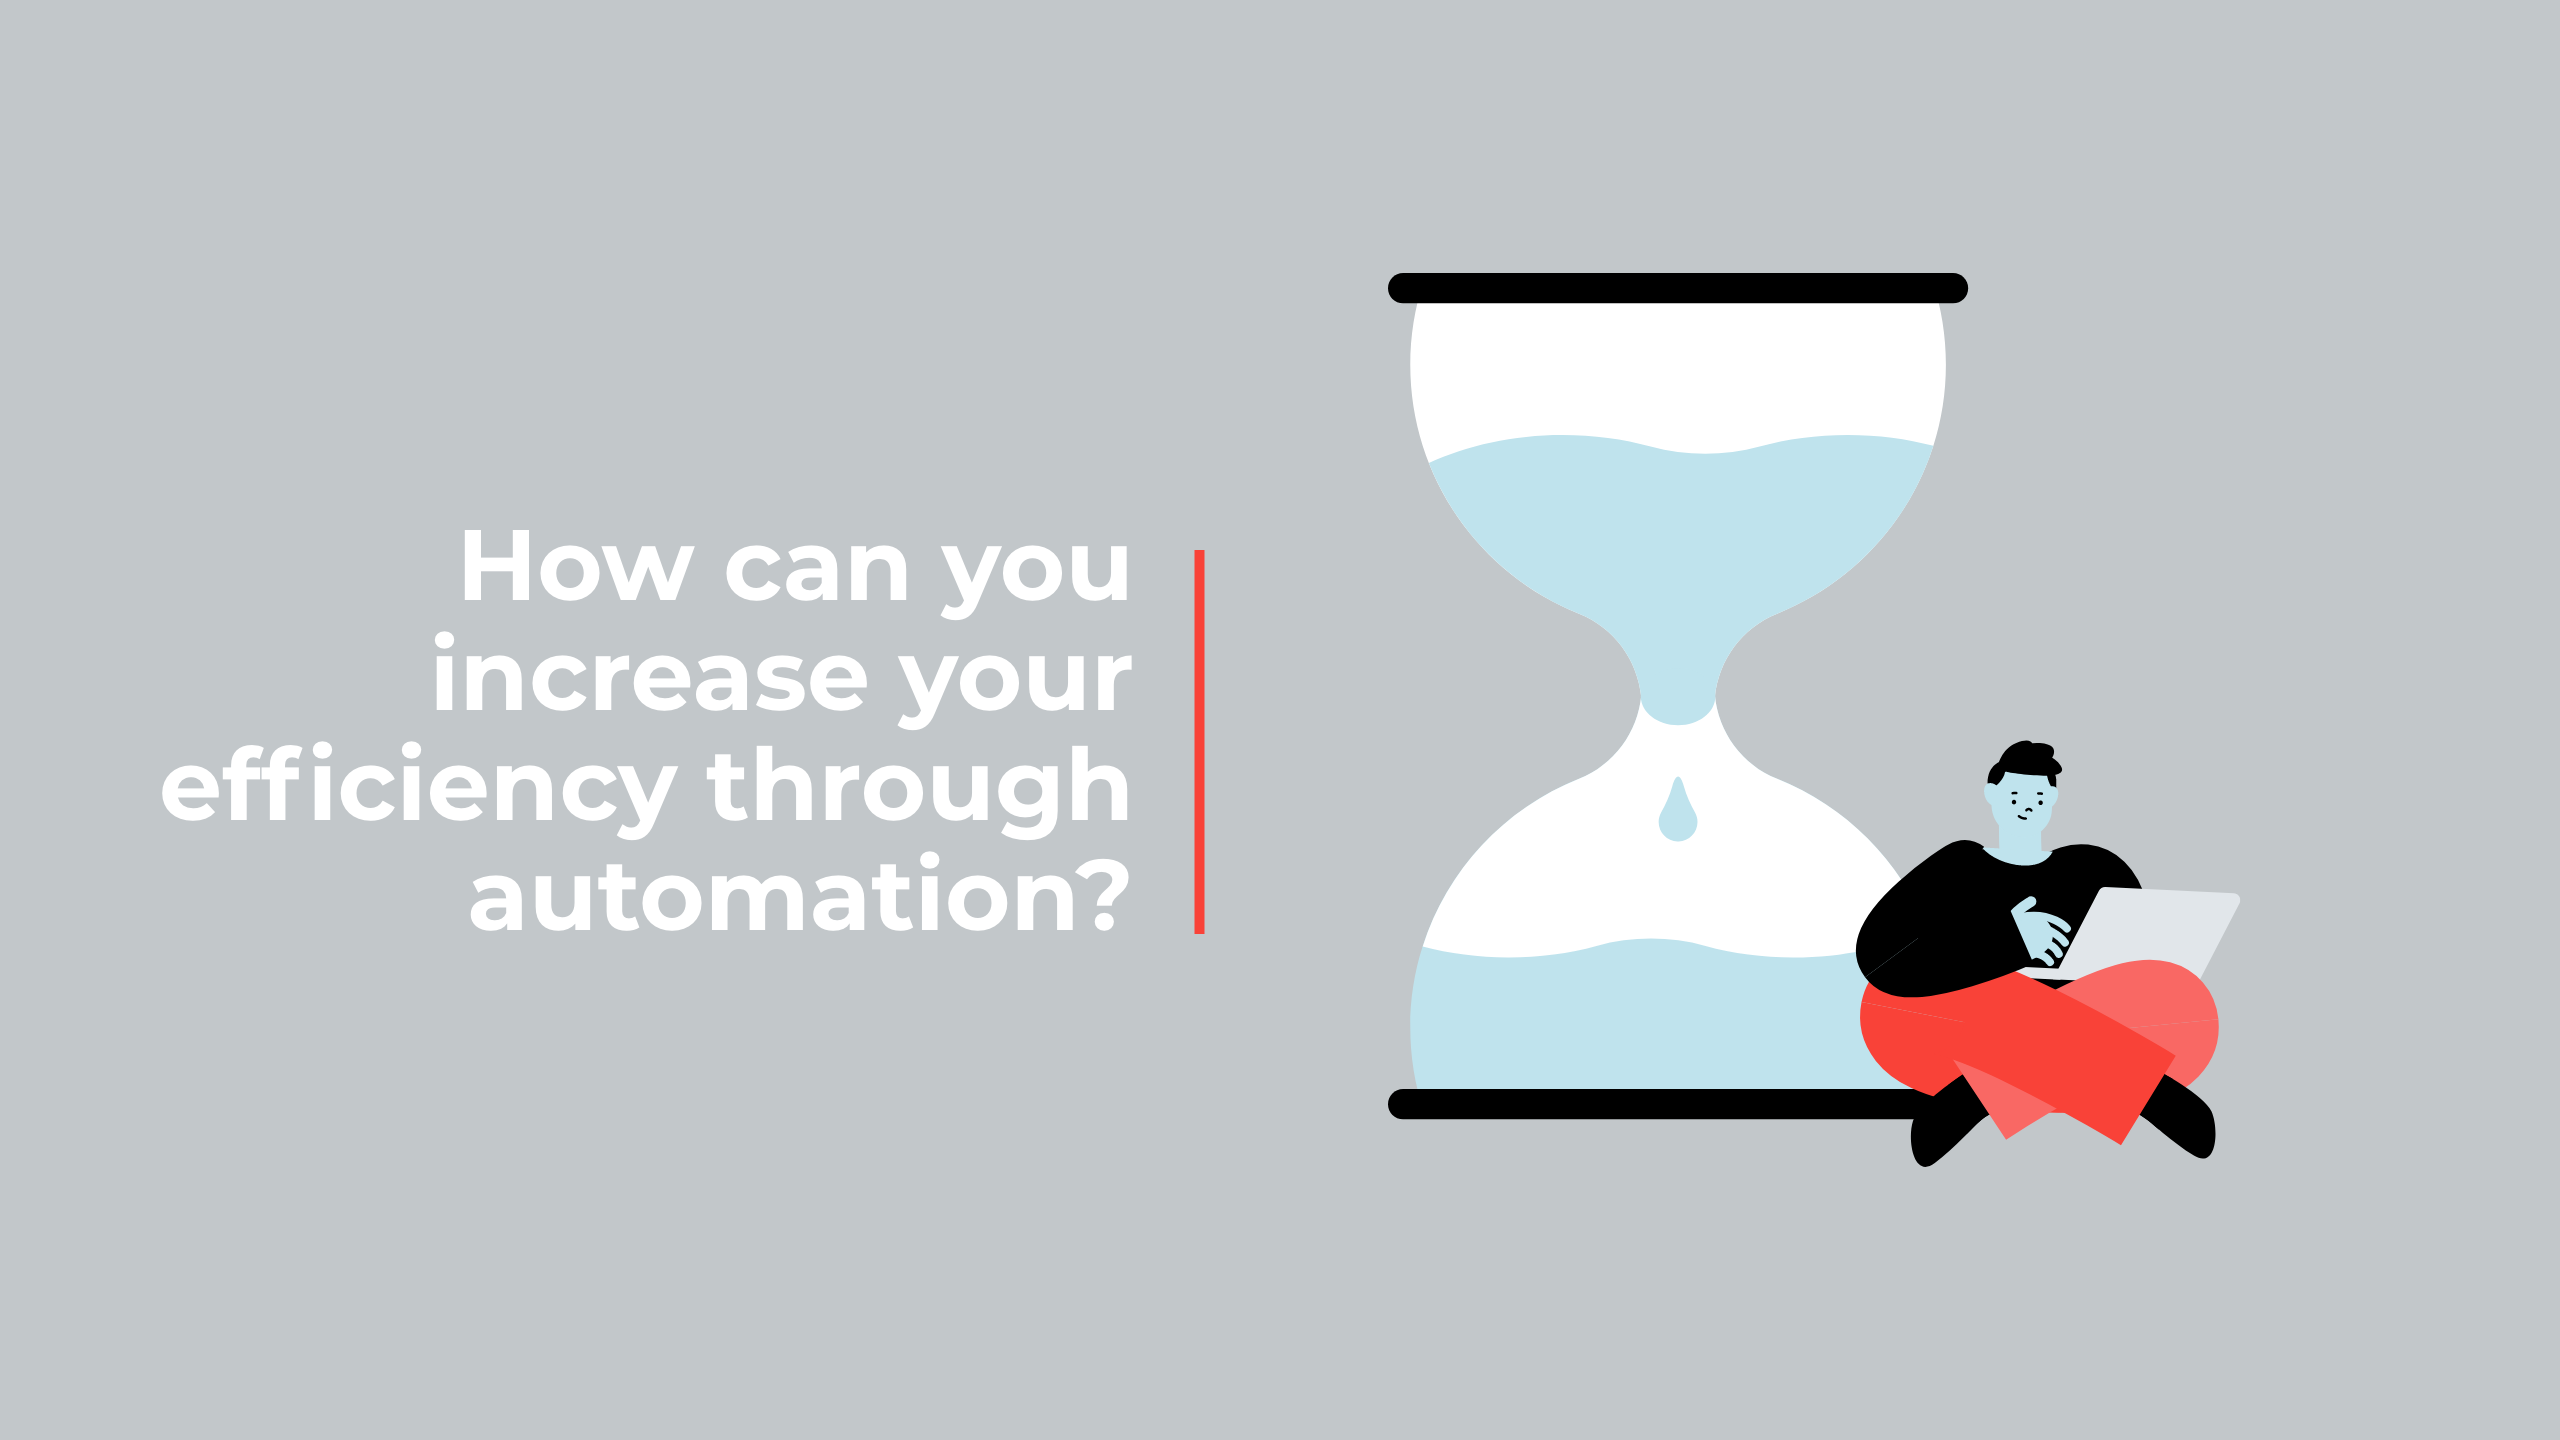 How can you increase your efficiency through automation?